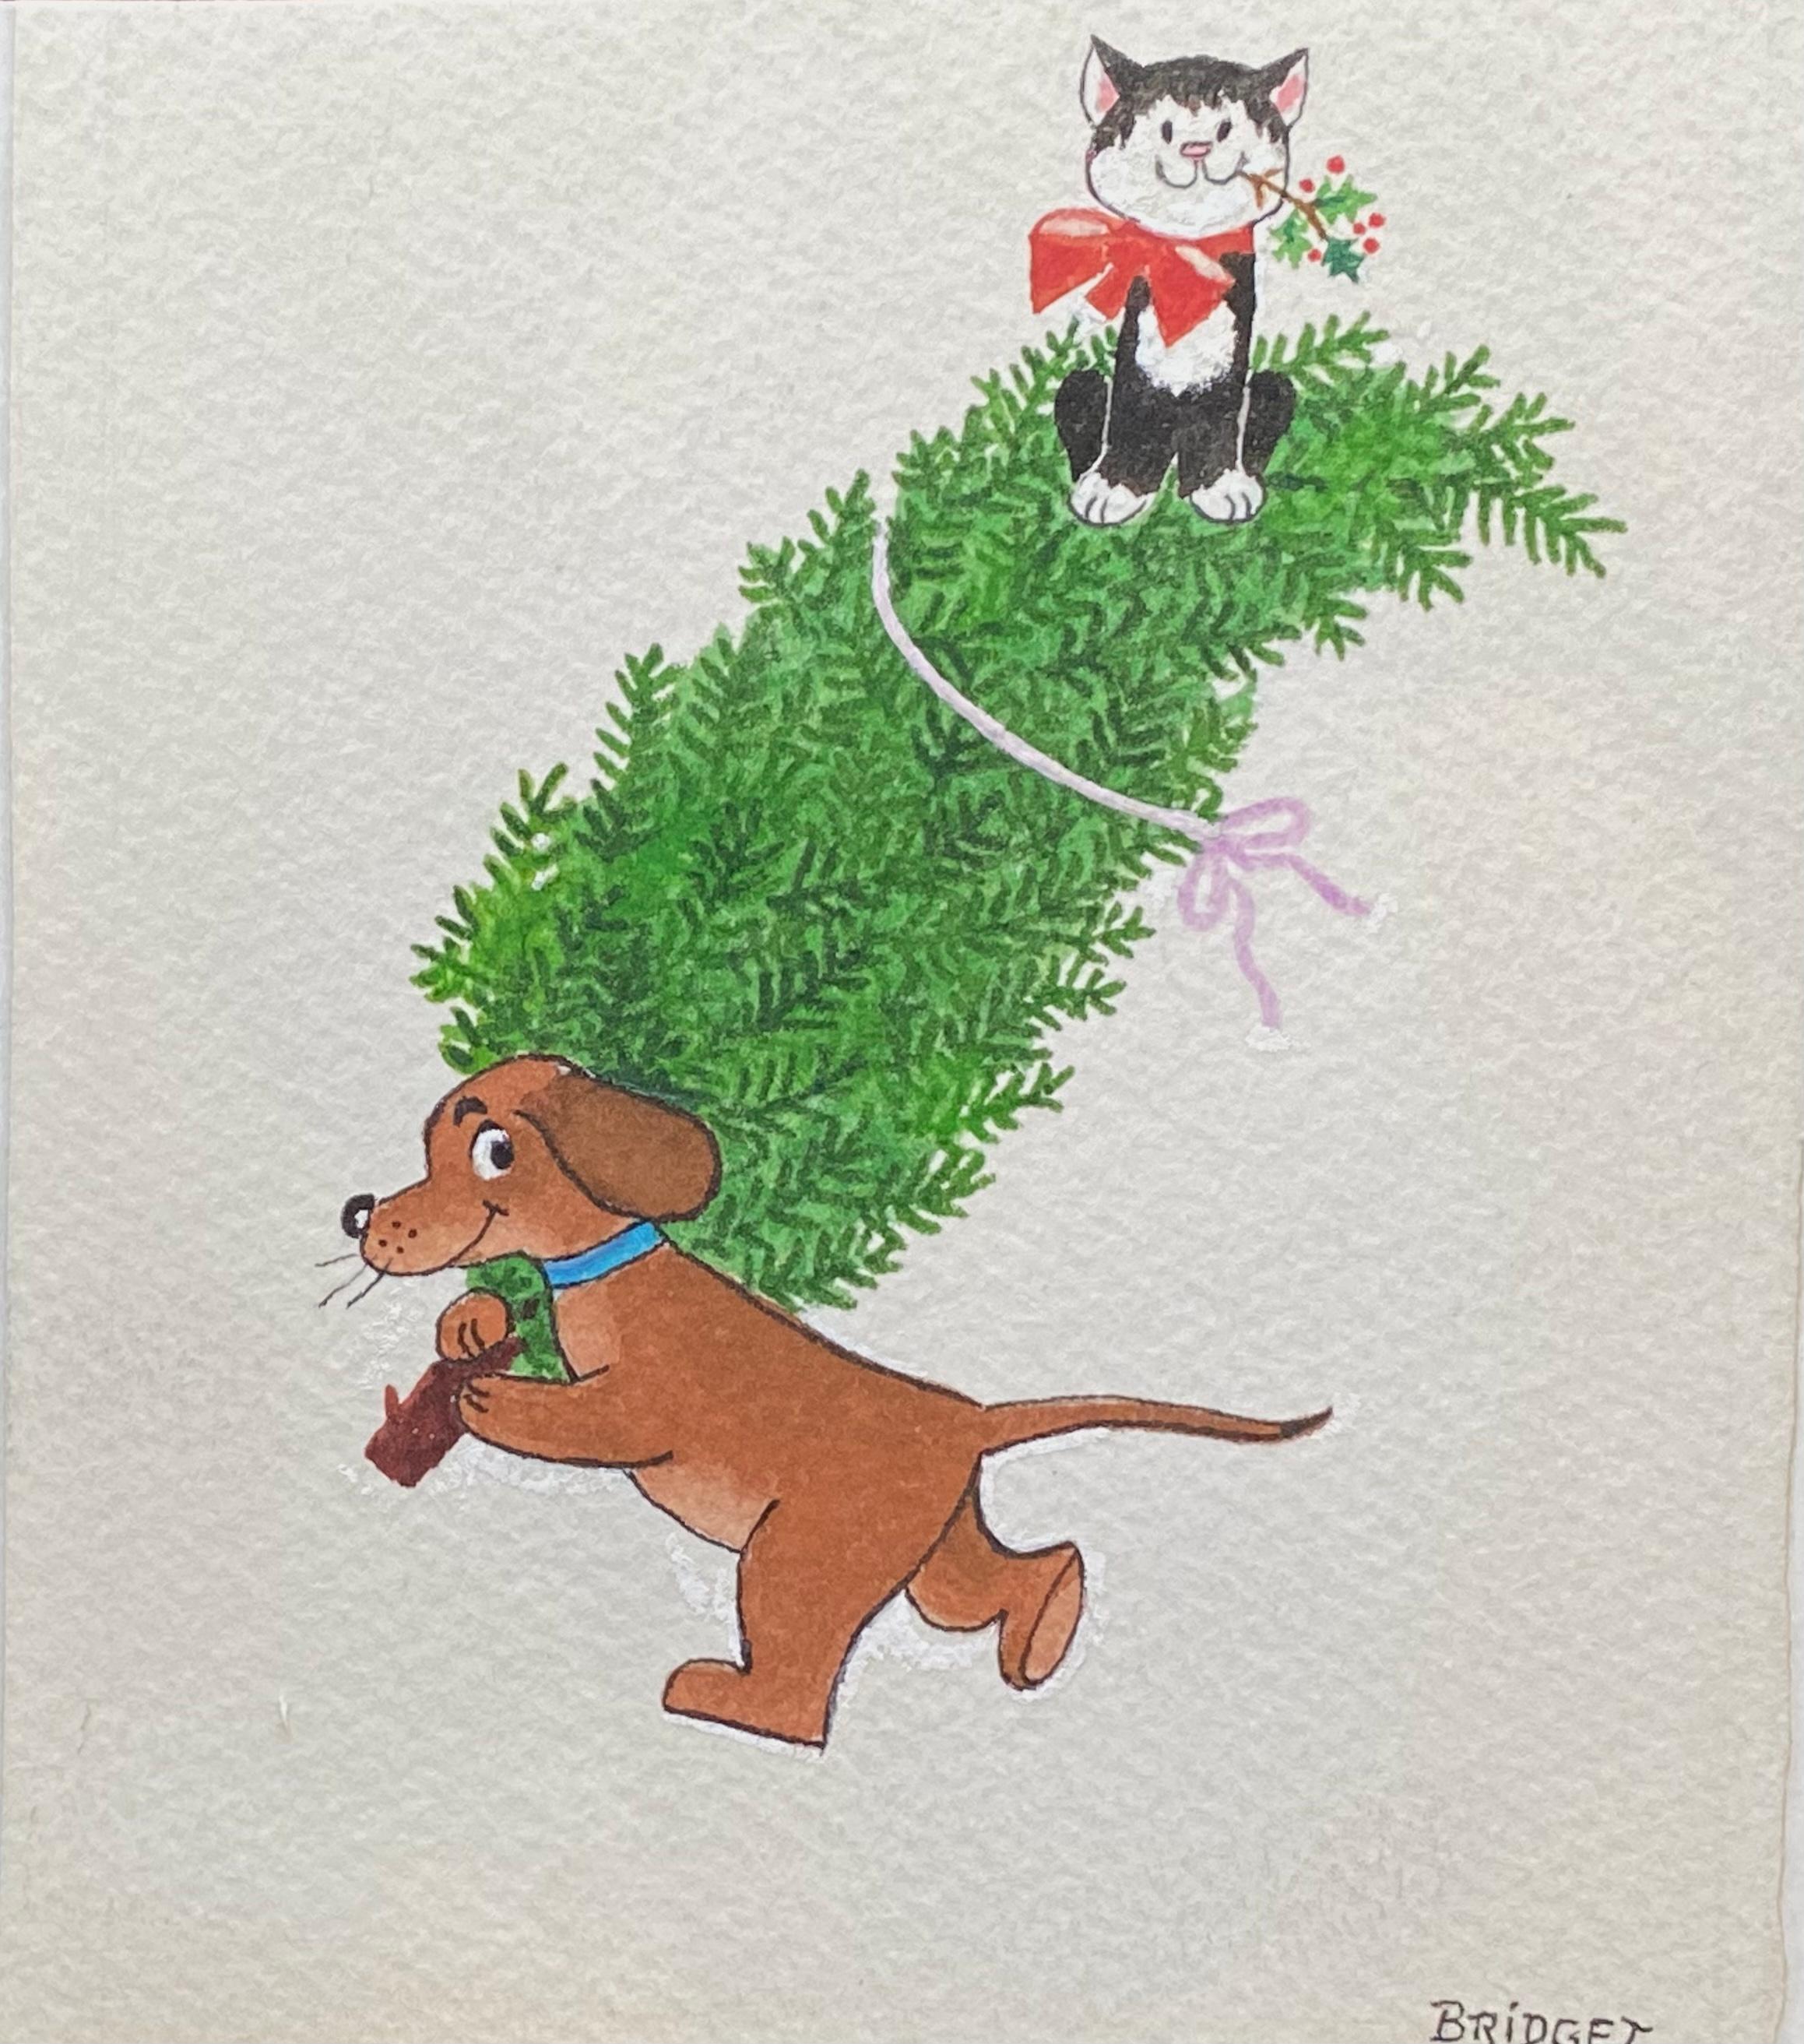 Unknown Animal Art - “Puppy with Christmas Tree & Kitty”